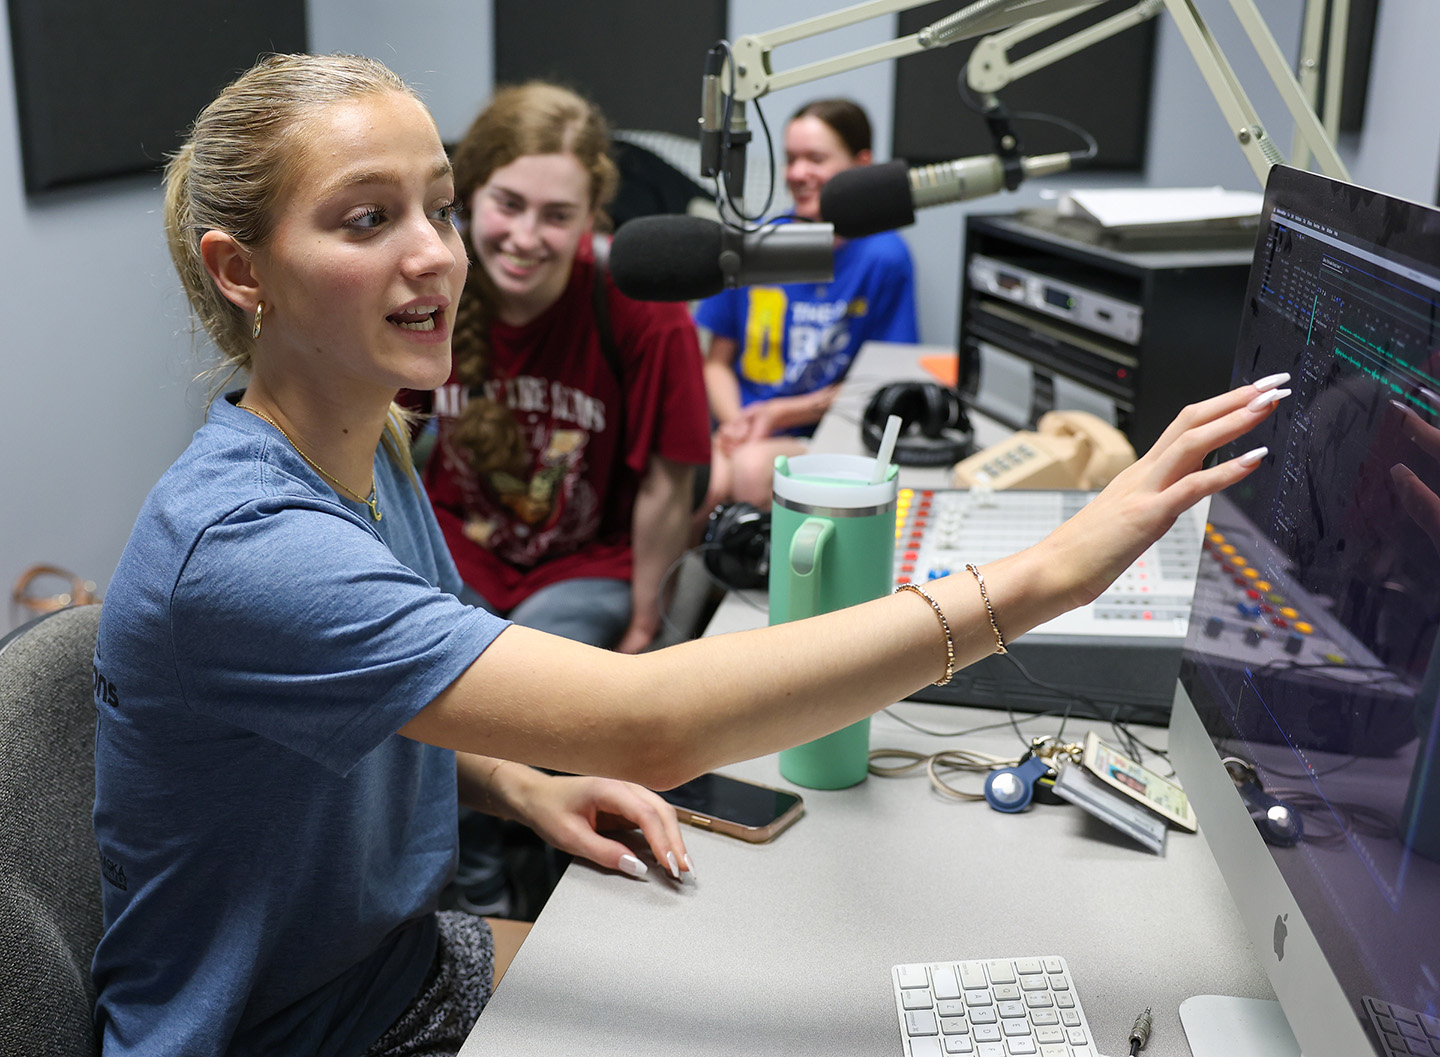 Chloe Howard of Kearney, front, gets some airtime in the UNK radio studio during the Digital Expressions Media Camp.